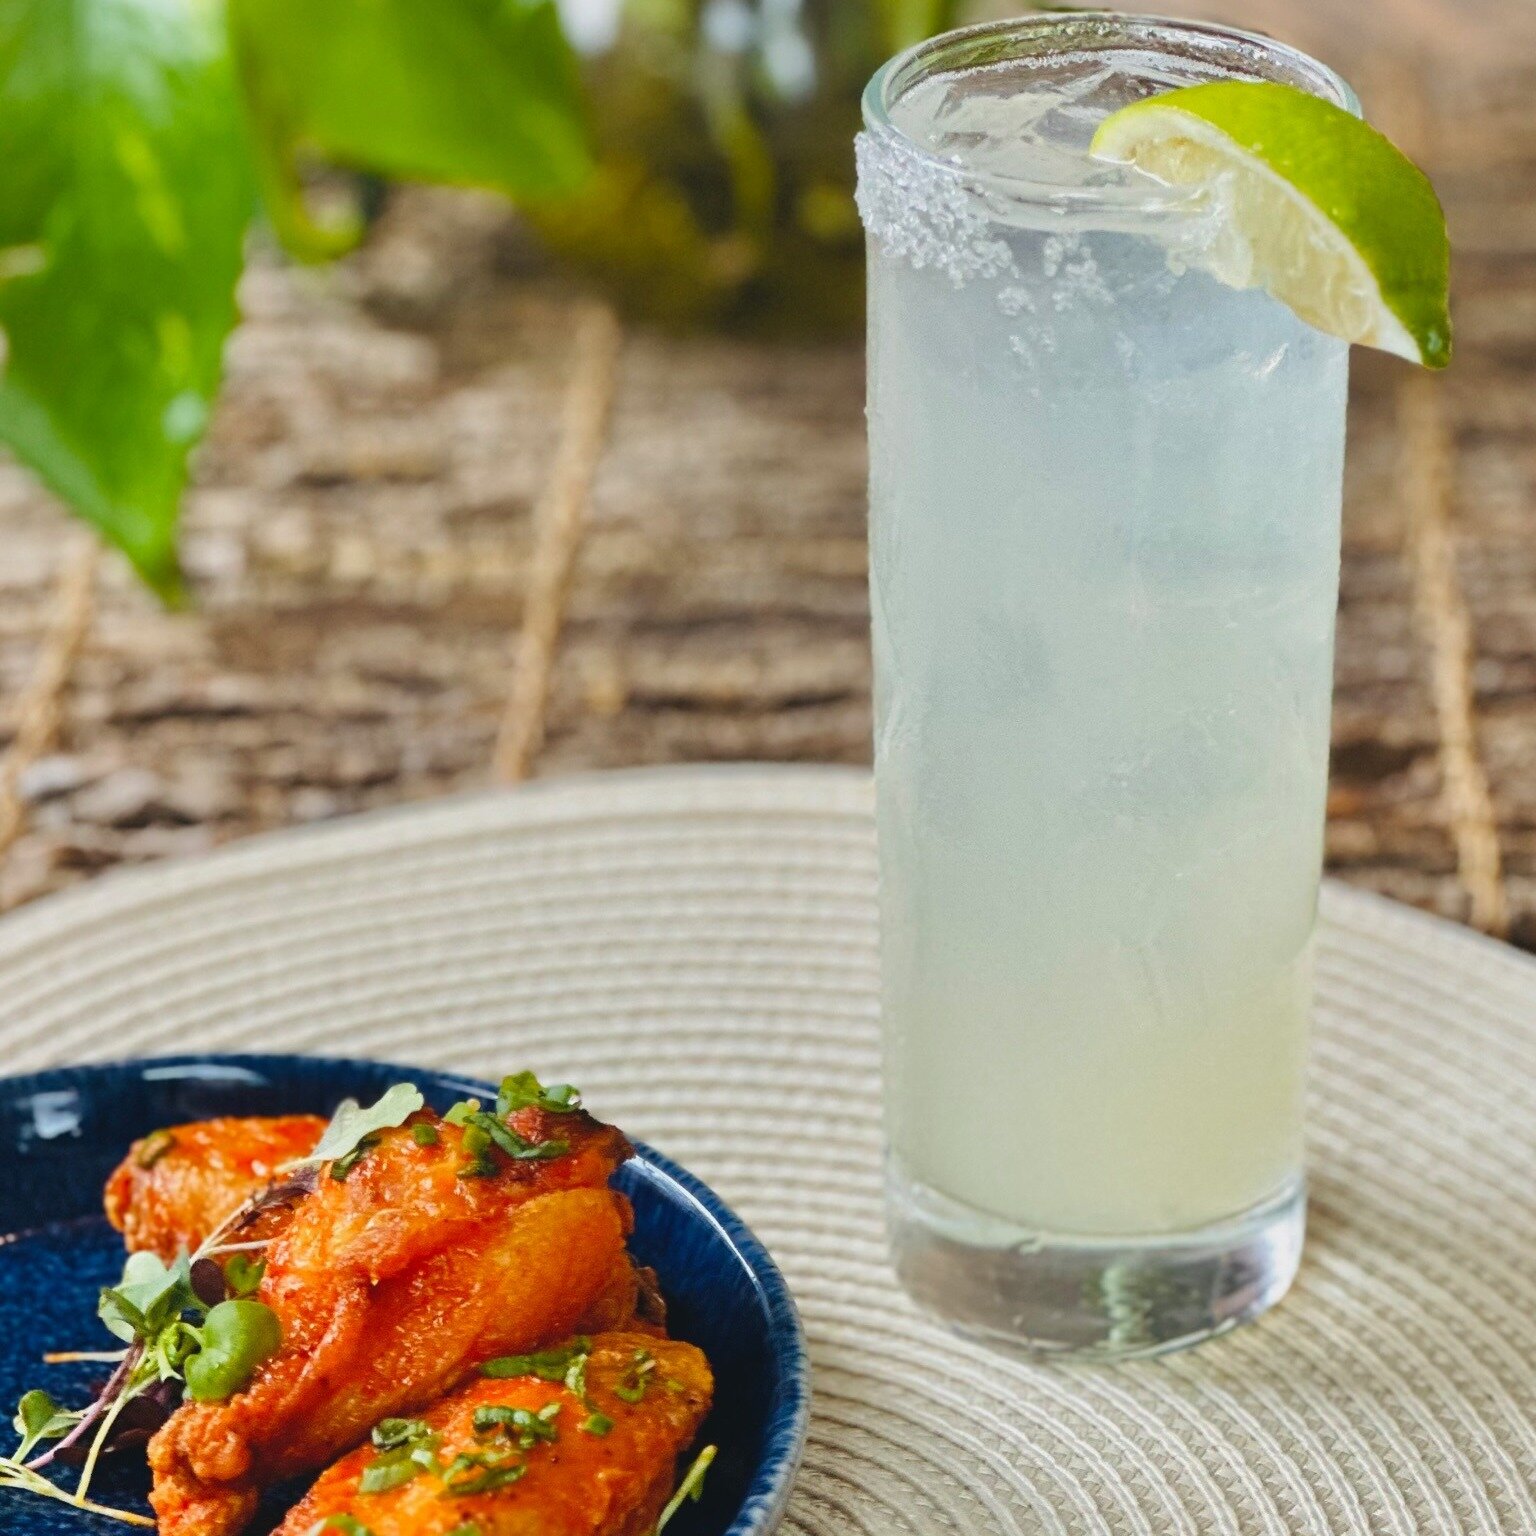 You made it to Wednesday! Celebrate with BLU Point Seafood Co's Happy Hour from 4-6pm. Featuring our Crispy Buffalo Wings &amp; Fresh House Margarita.  #stauntonhappyhour #stauntonva #downtownstaunton #blupointseafood #visitva